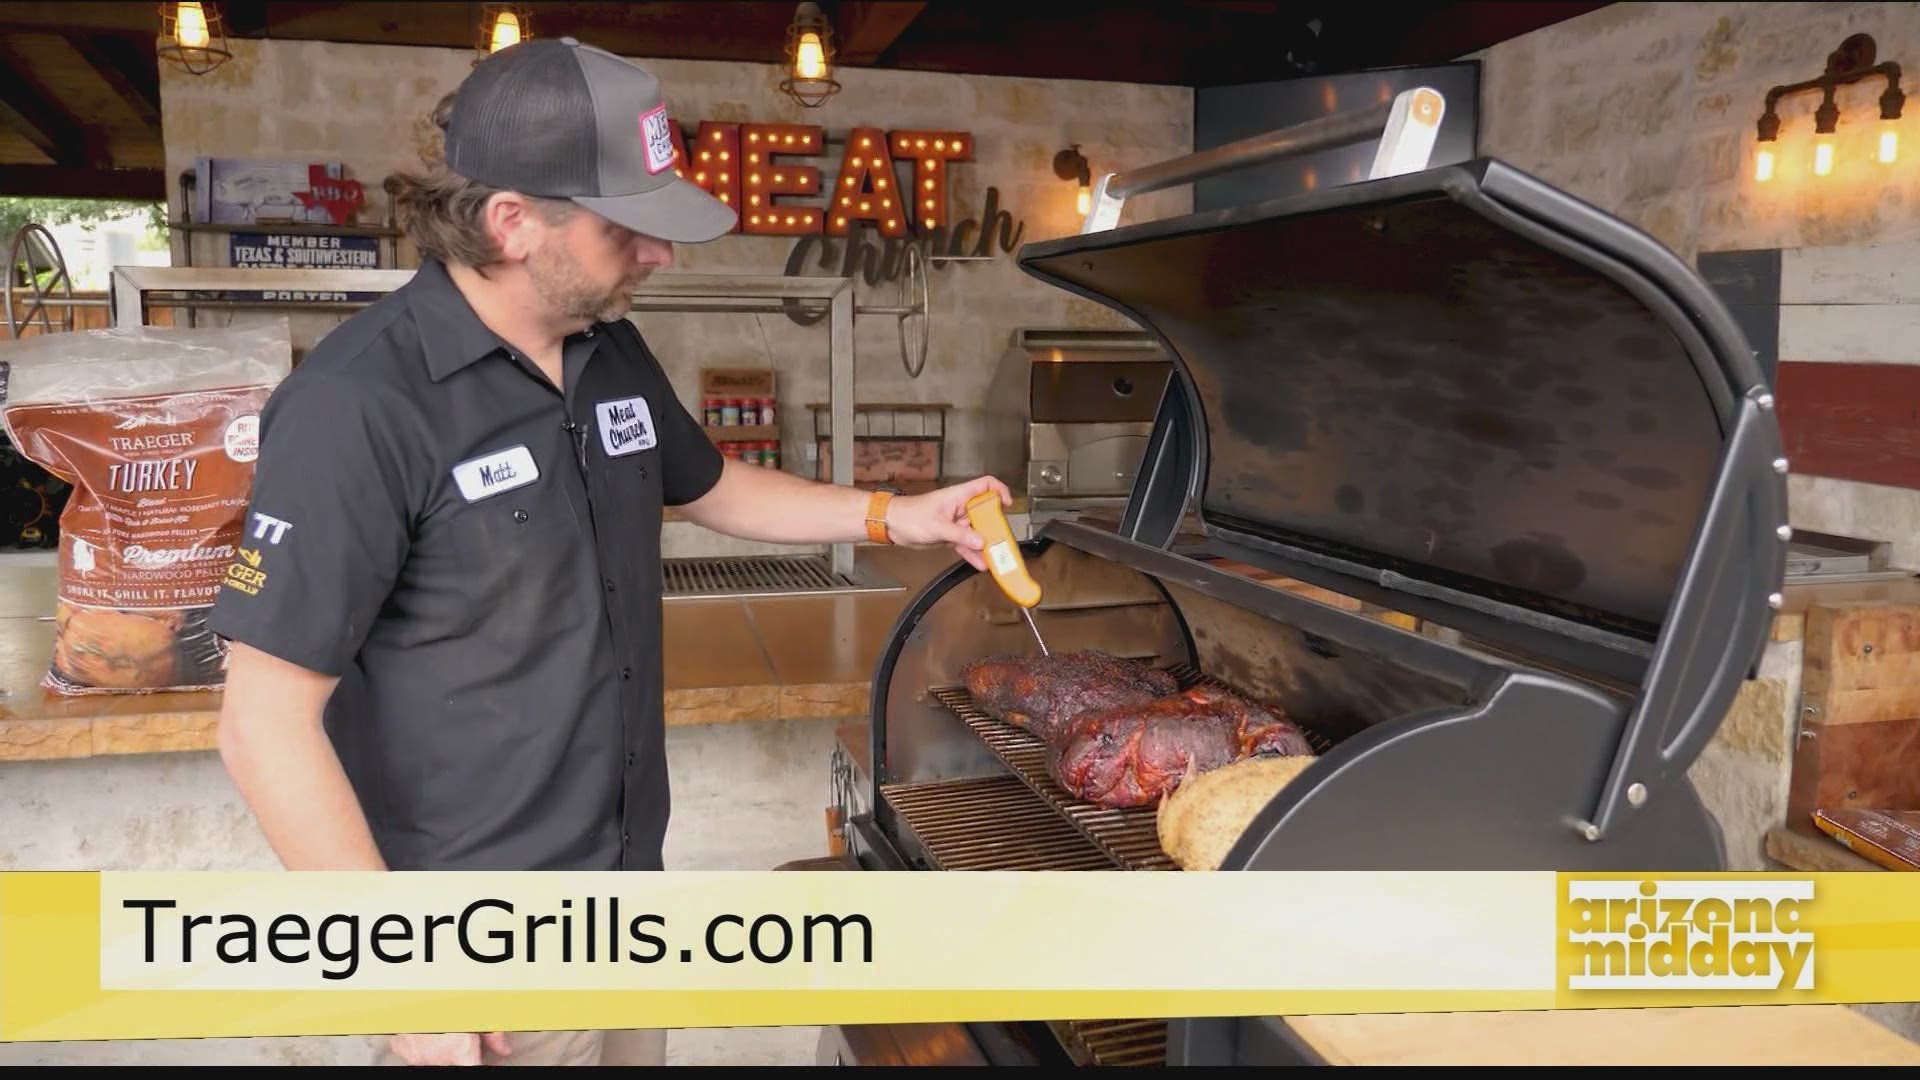 "BBQ Pitmaster" Matt Pittman shares grilling tips for a tasty barbecue and how Traeger Grills could help make your next barbecue easier.